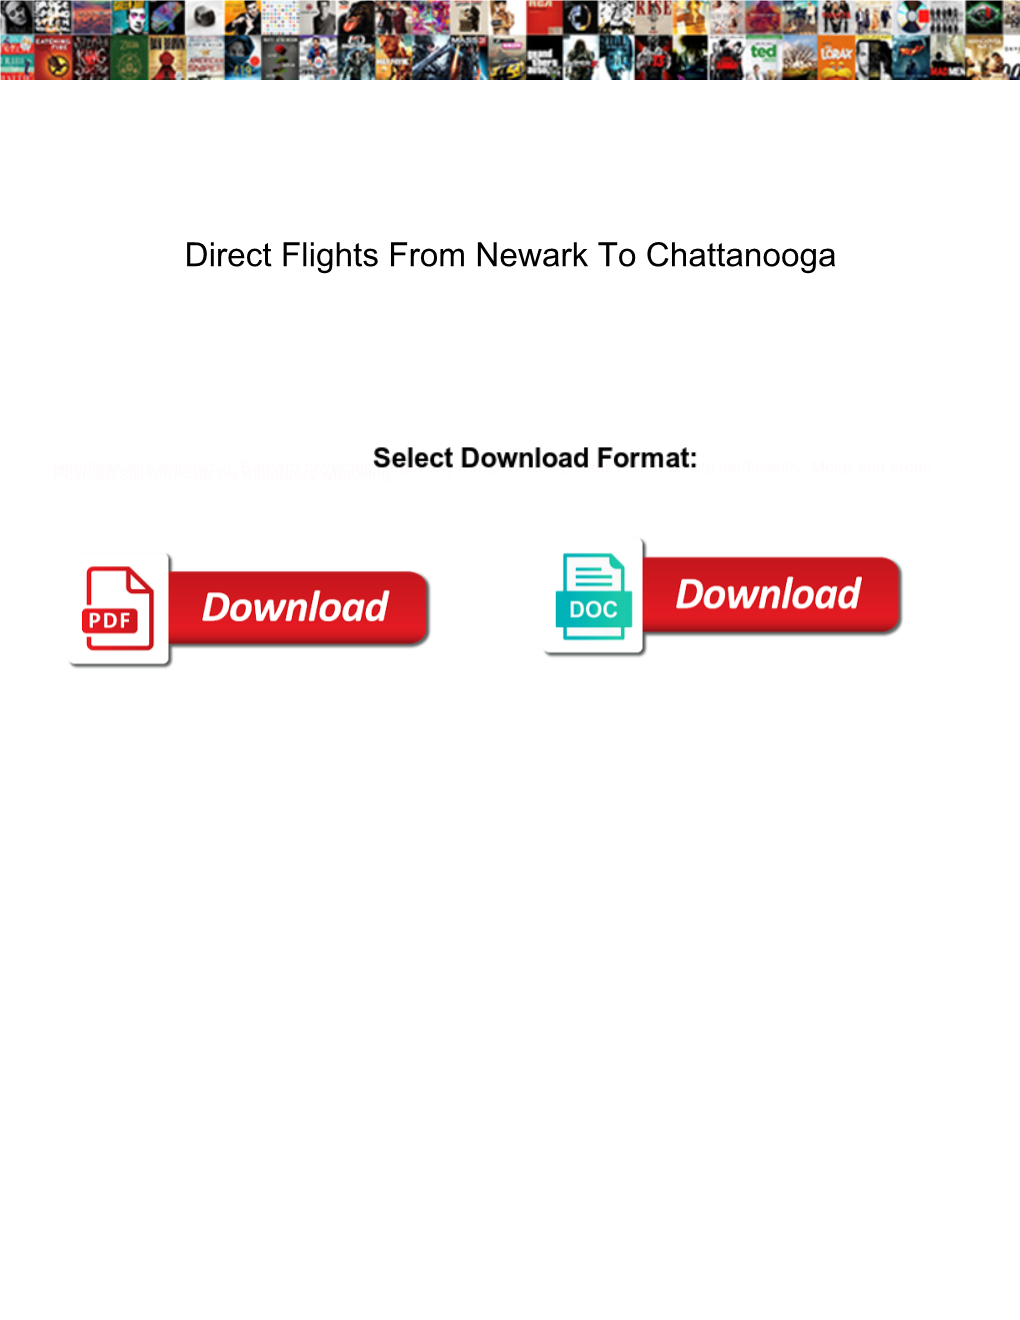 Direct Flights from Newark to Chattanooga